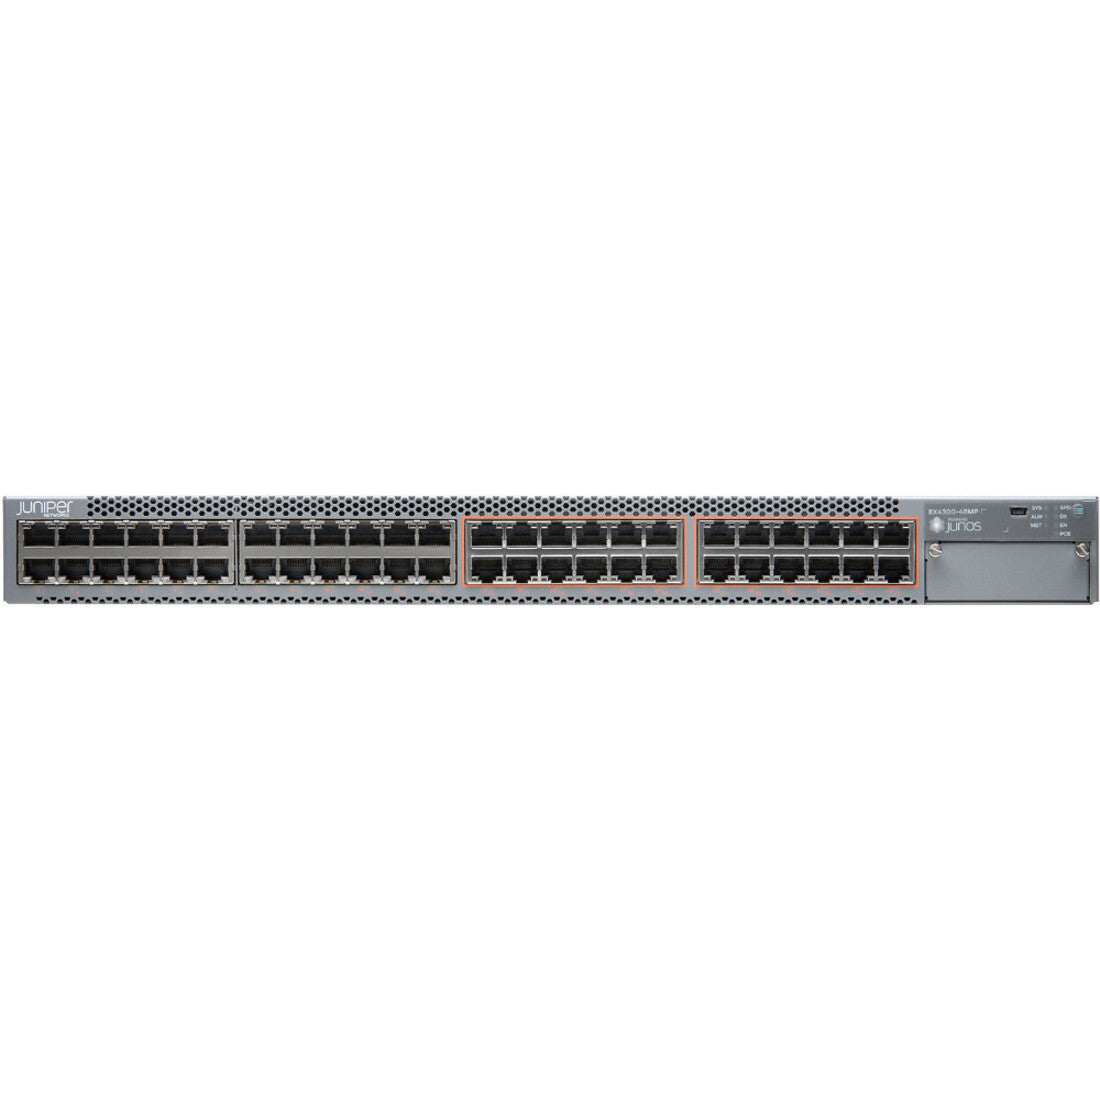 Juniper EX4300-48MP Layer 3 Switch, 48 Network Ports, 10GBase-T, Gigabit Ethernet, Power Supply Supported